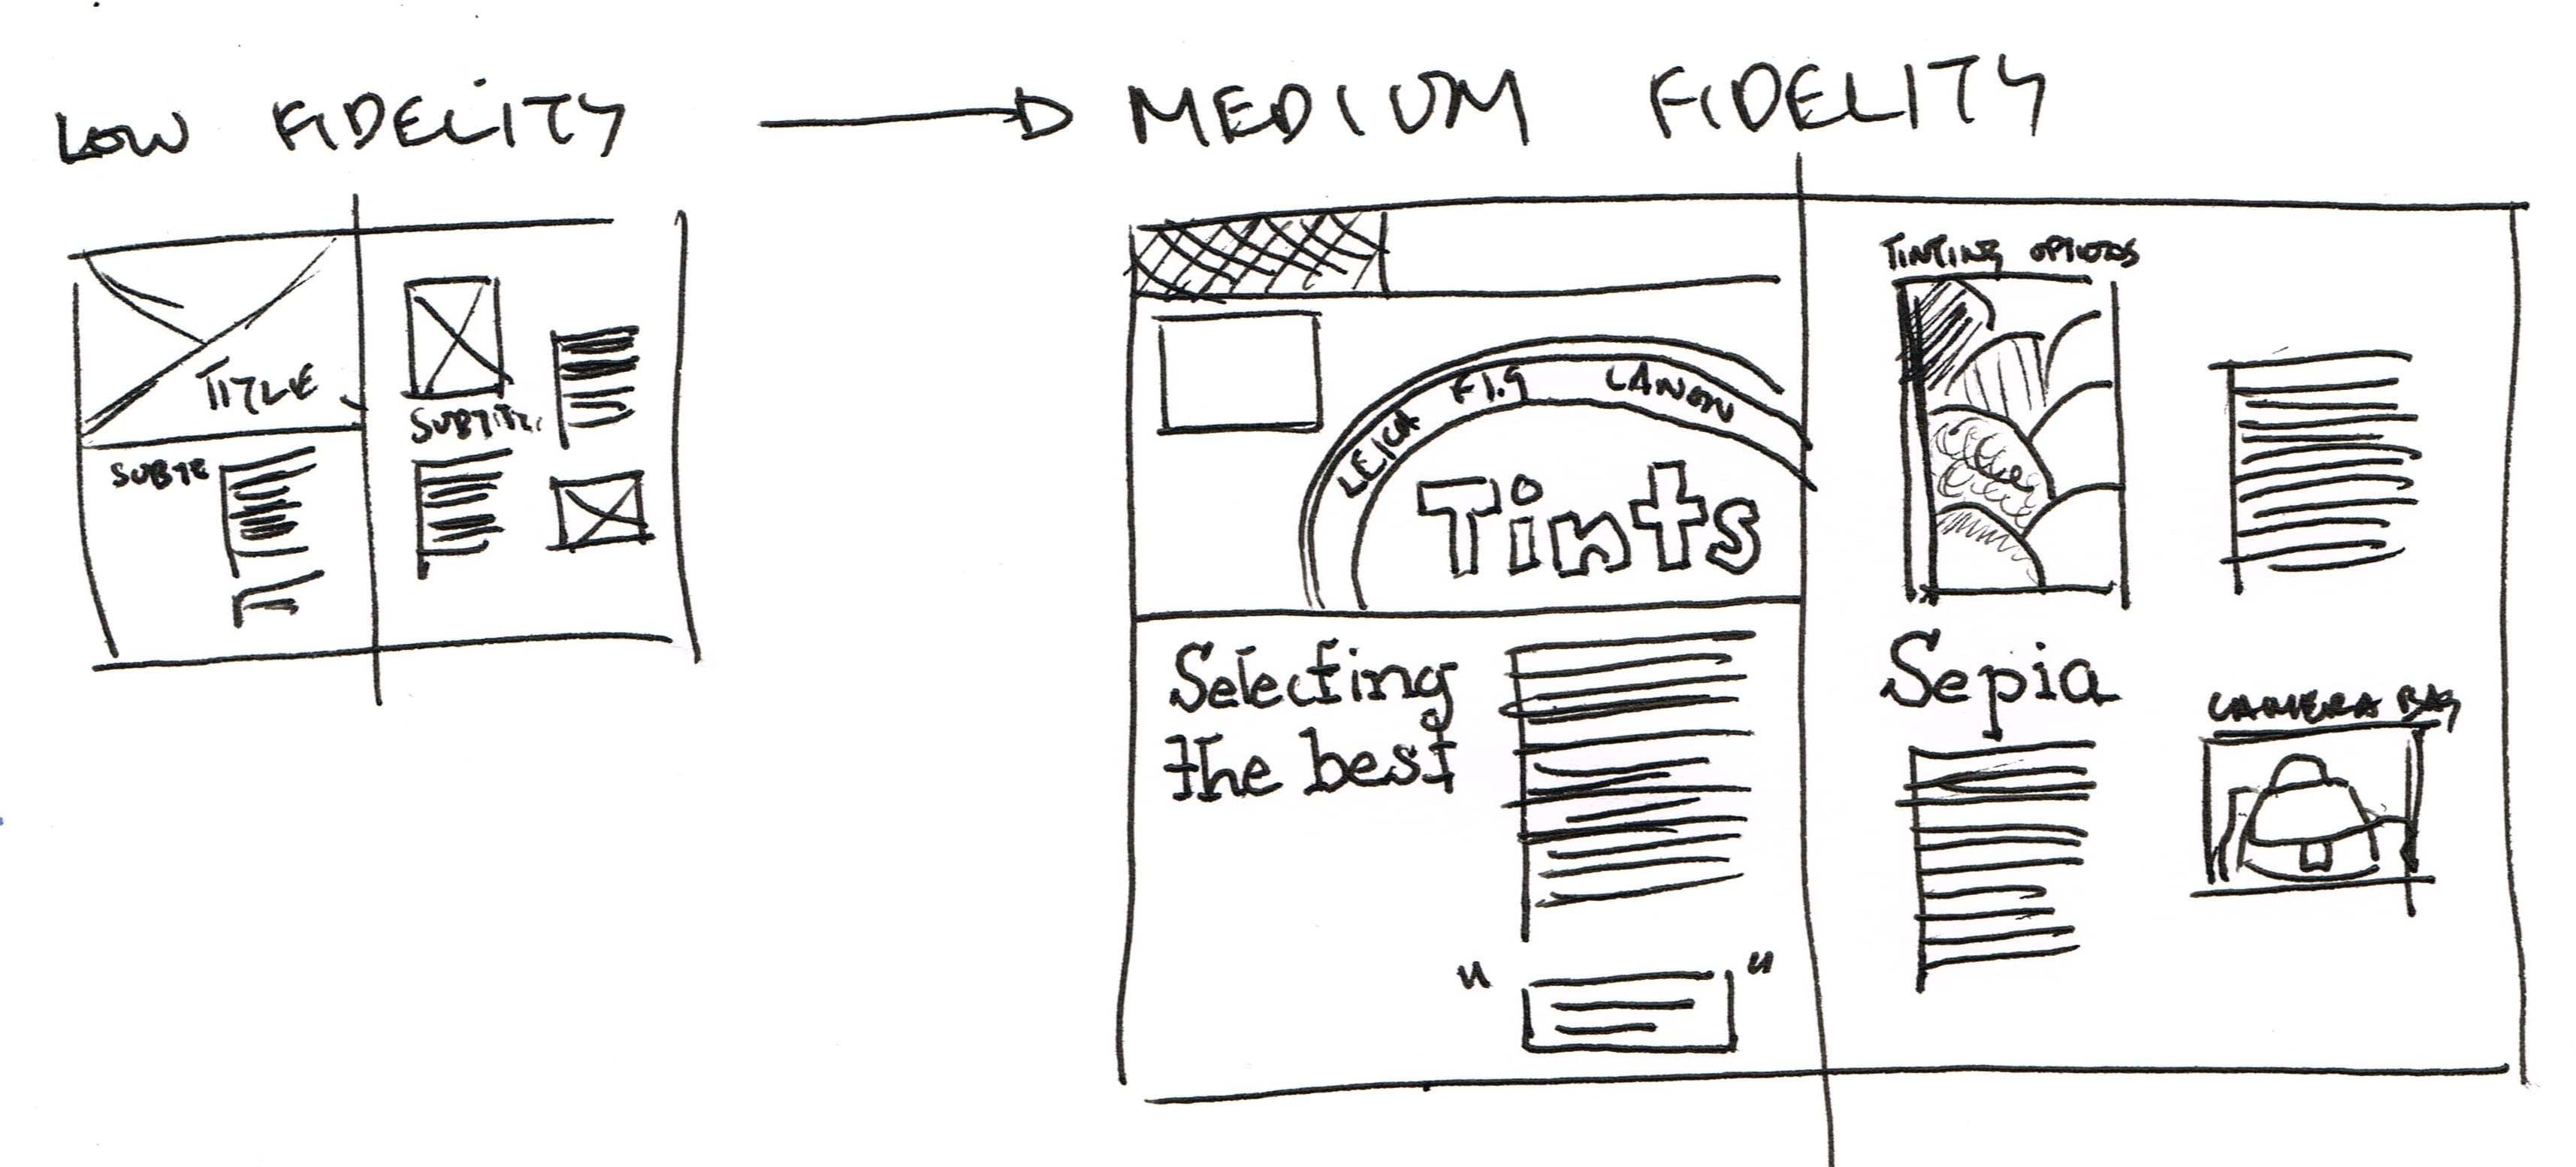 A sketch demonstrating the transition from a low-fidelity to medium fidelity sketch of a layout